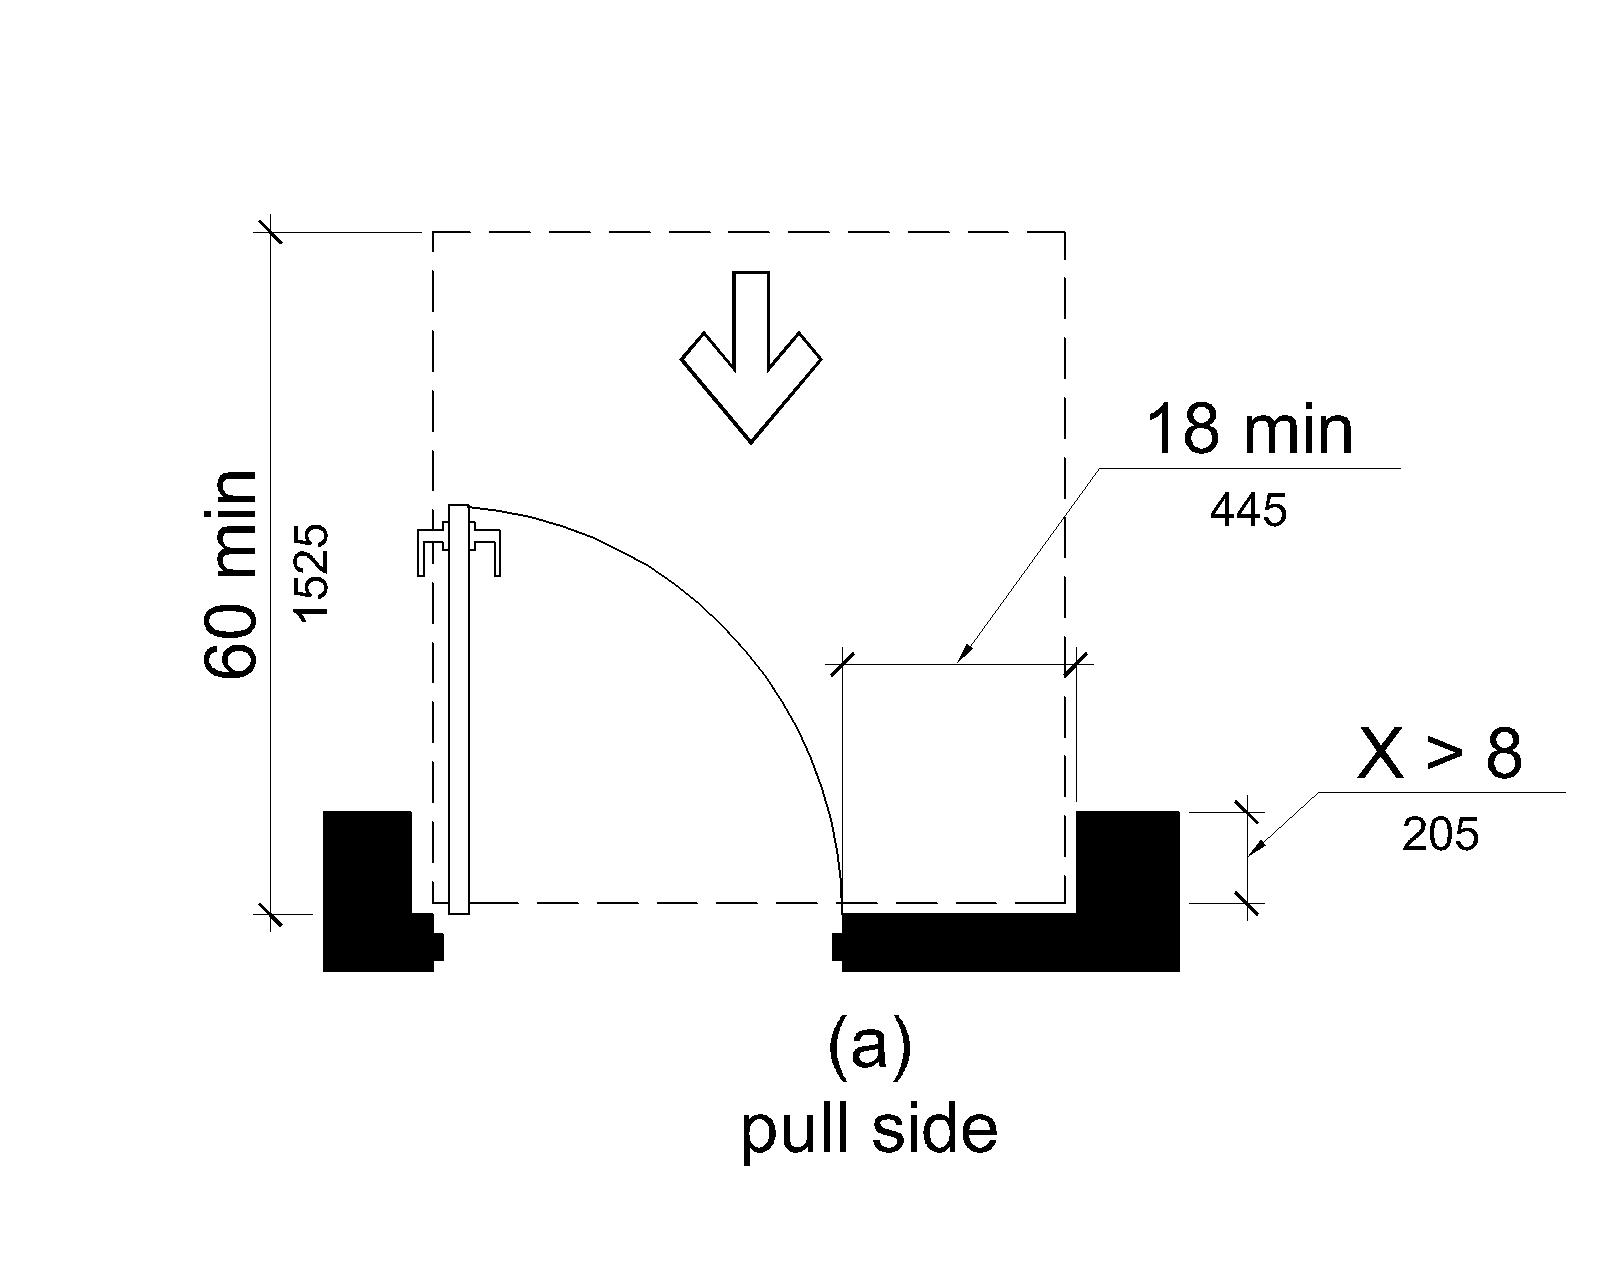 (a) Maneuvering space on the pull side extends 18 inches (455 mm) minimum beyond the latch side of the door and 60 inches (1525 mm) minimum perpendicular to the plane of the doorway.